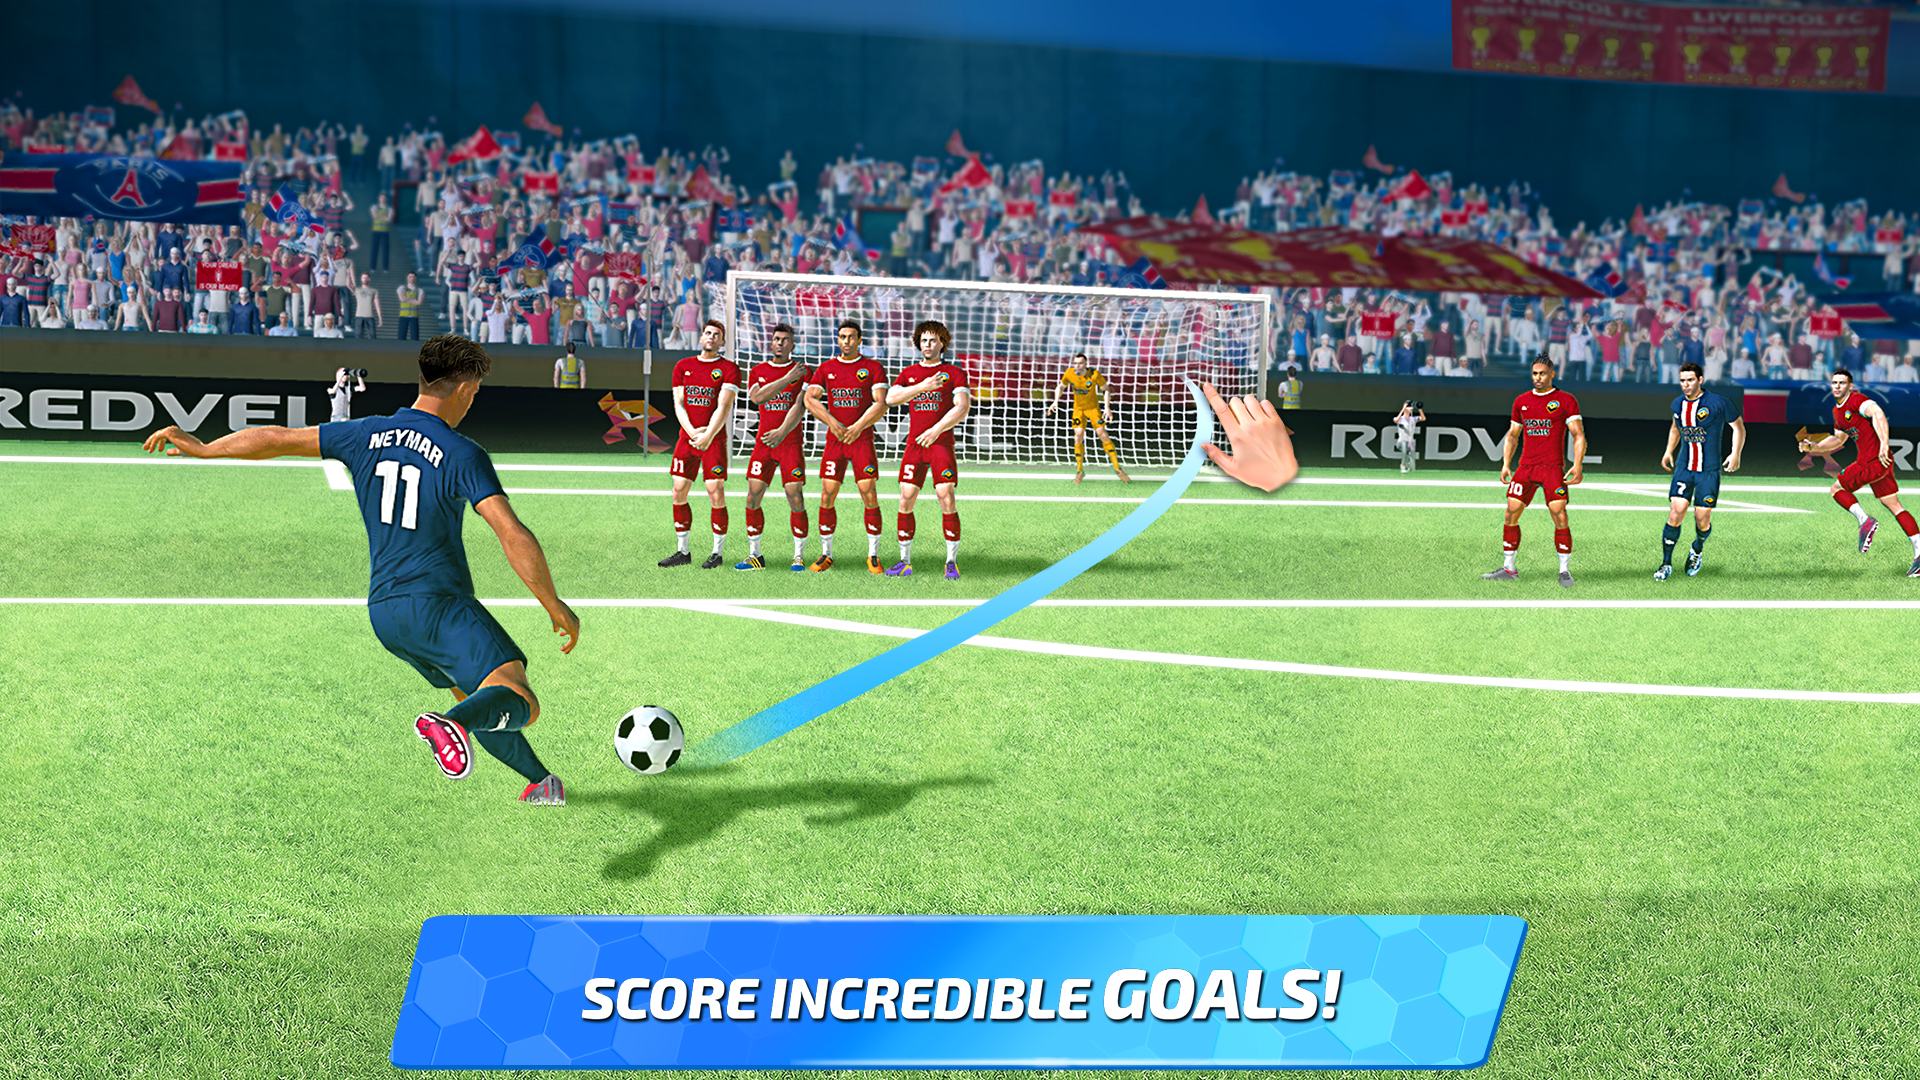 Download and play Soccer Star: 2022 Football Cup on PC & Mac